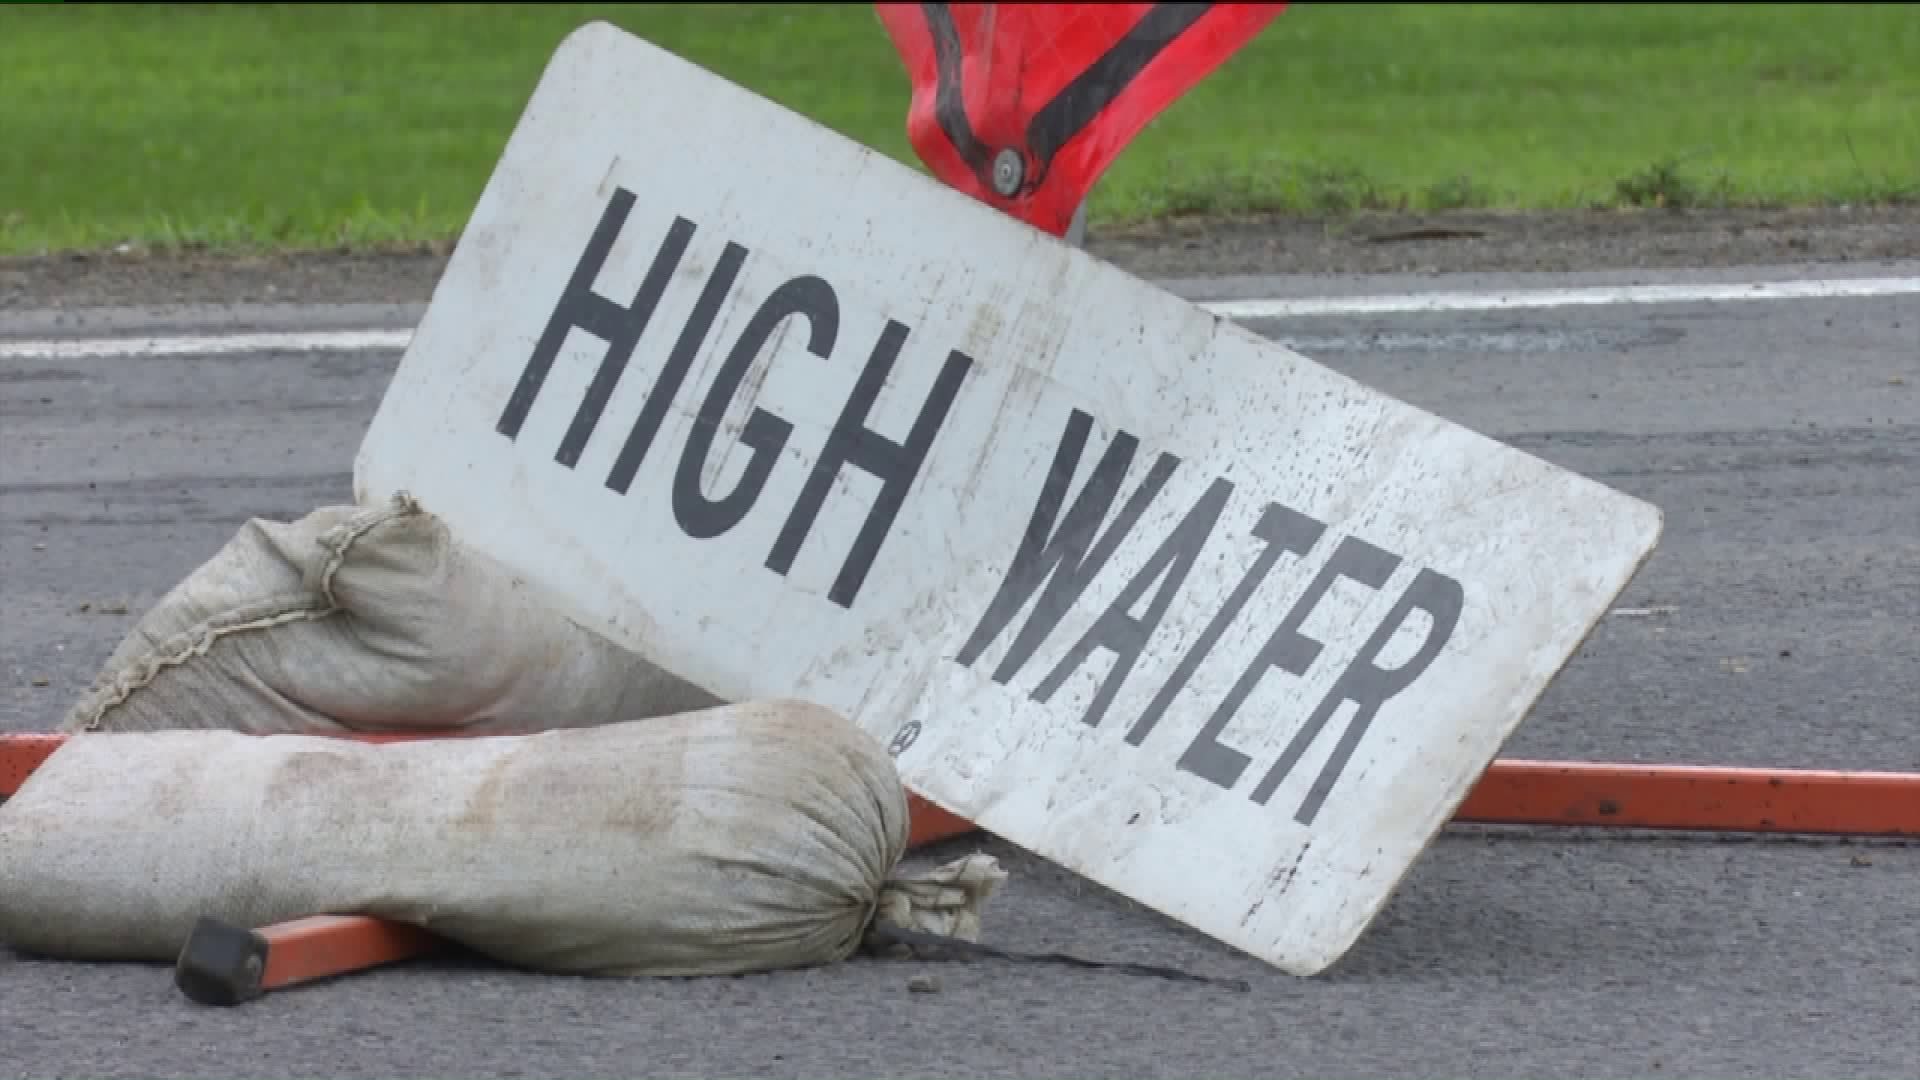 Parts of Susquehanna County Damaged by Flooding